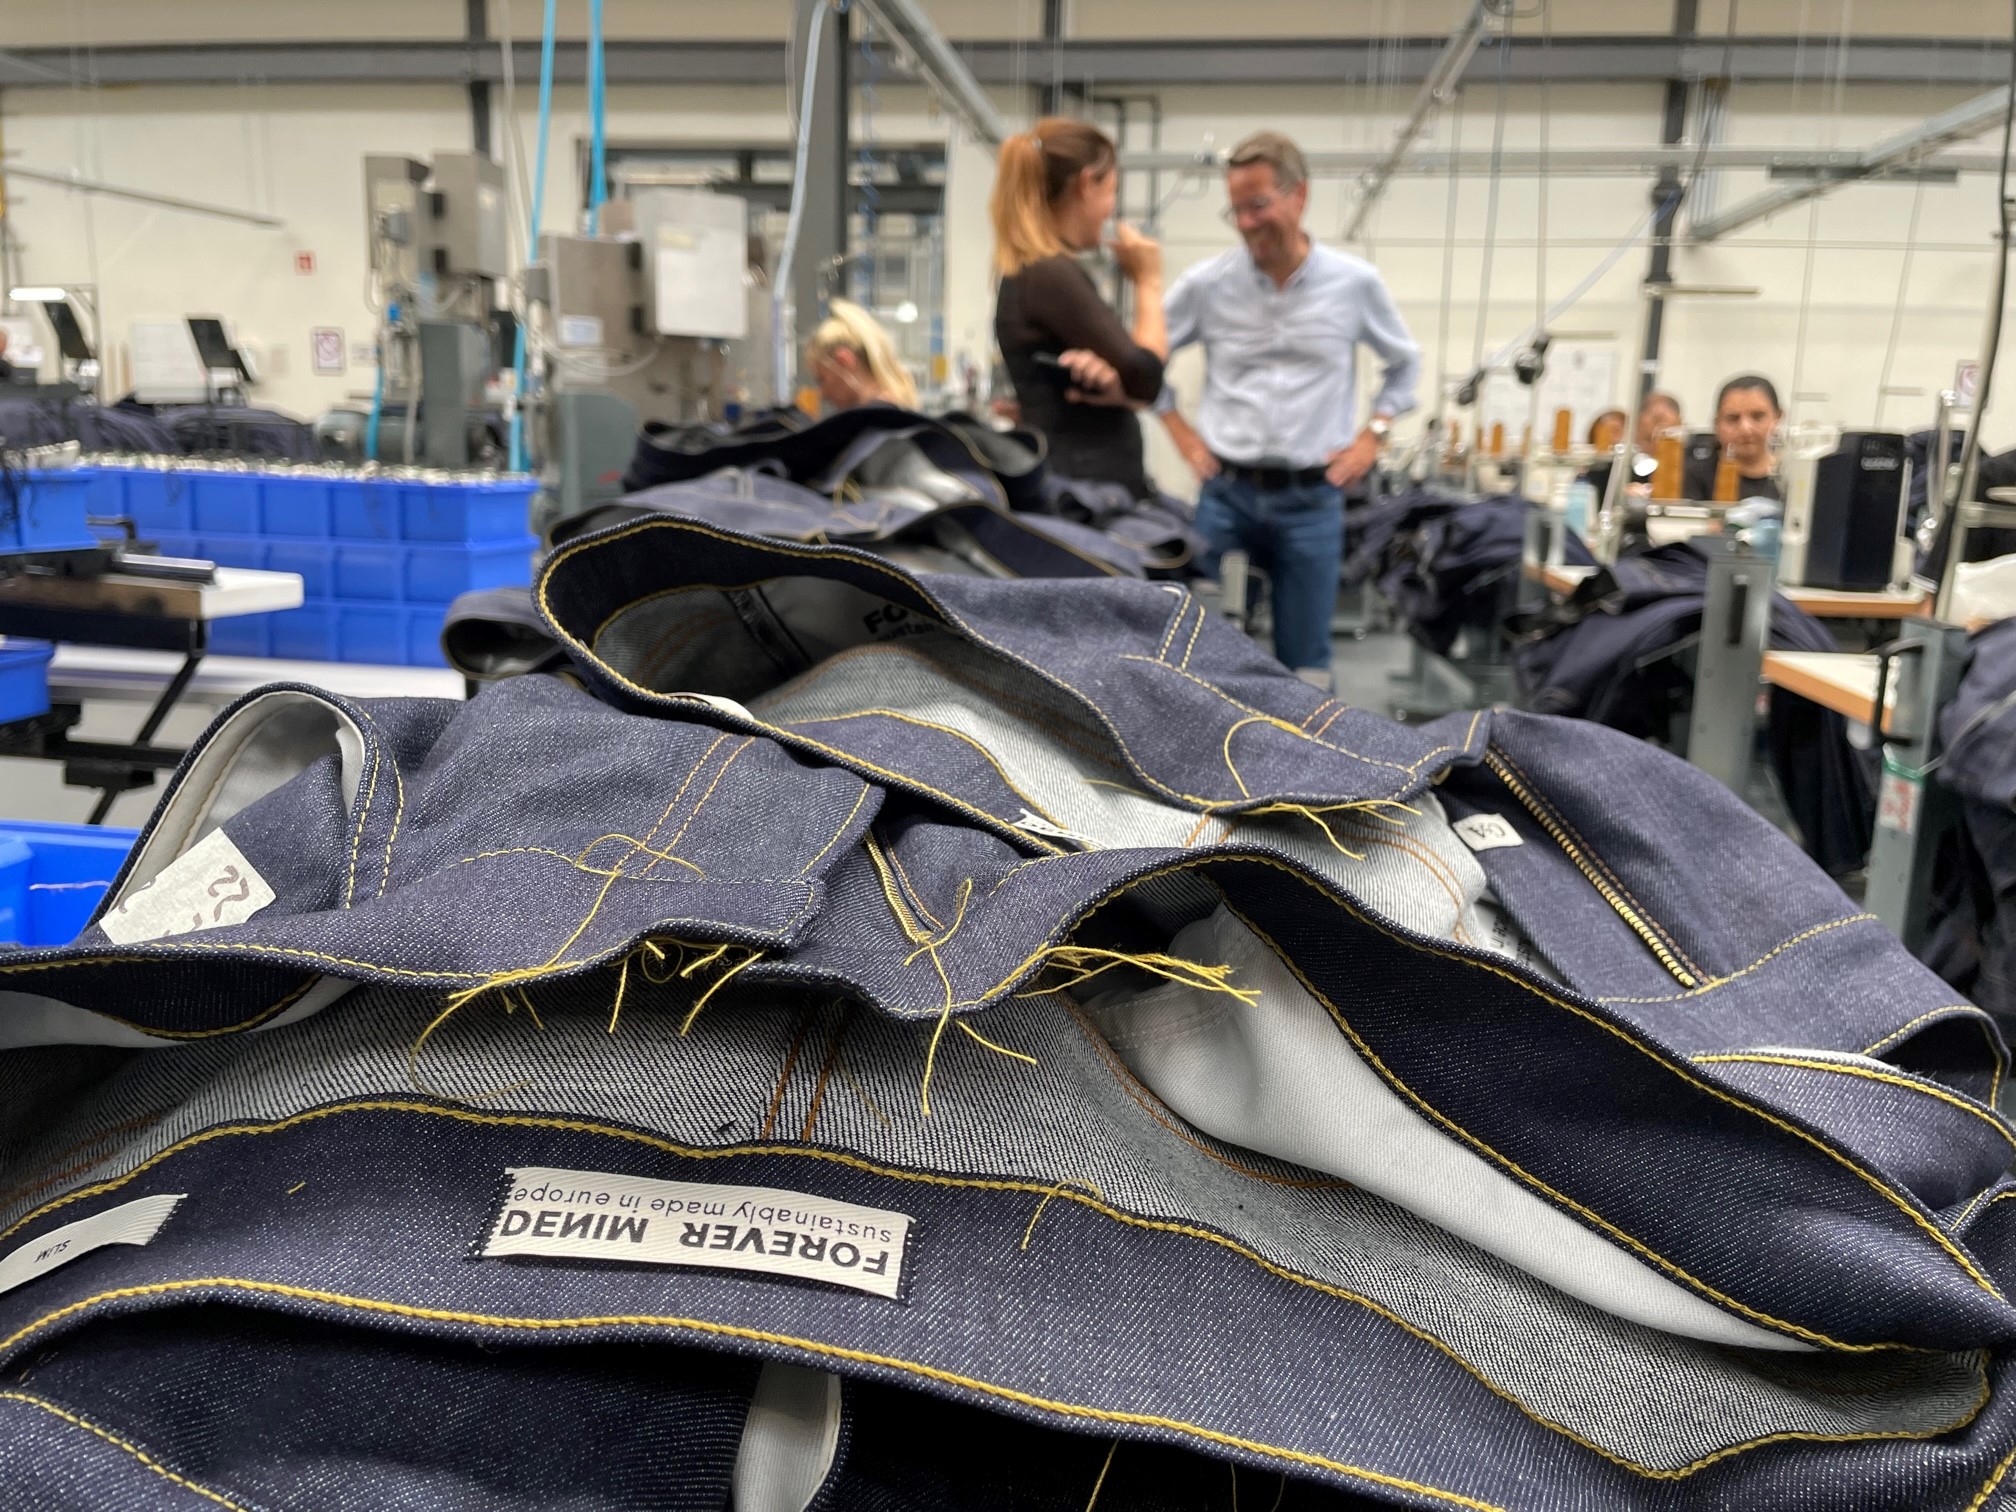 Sustainable jeans